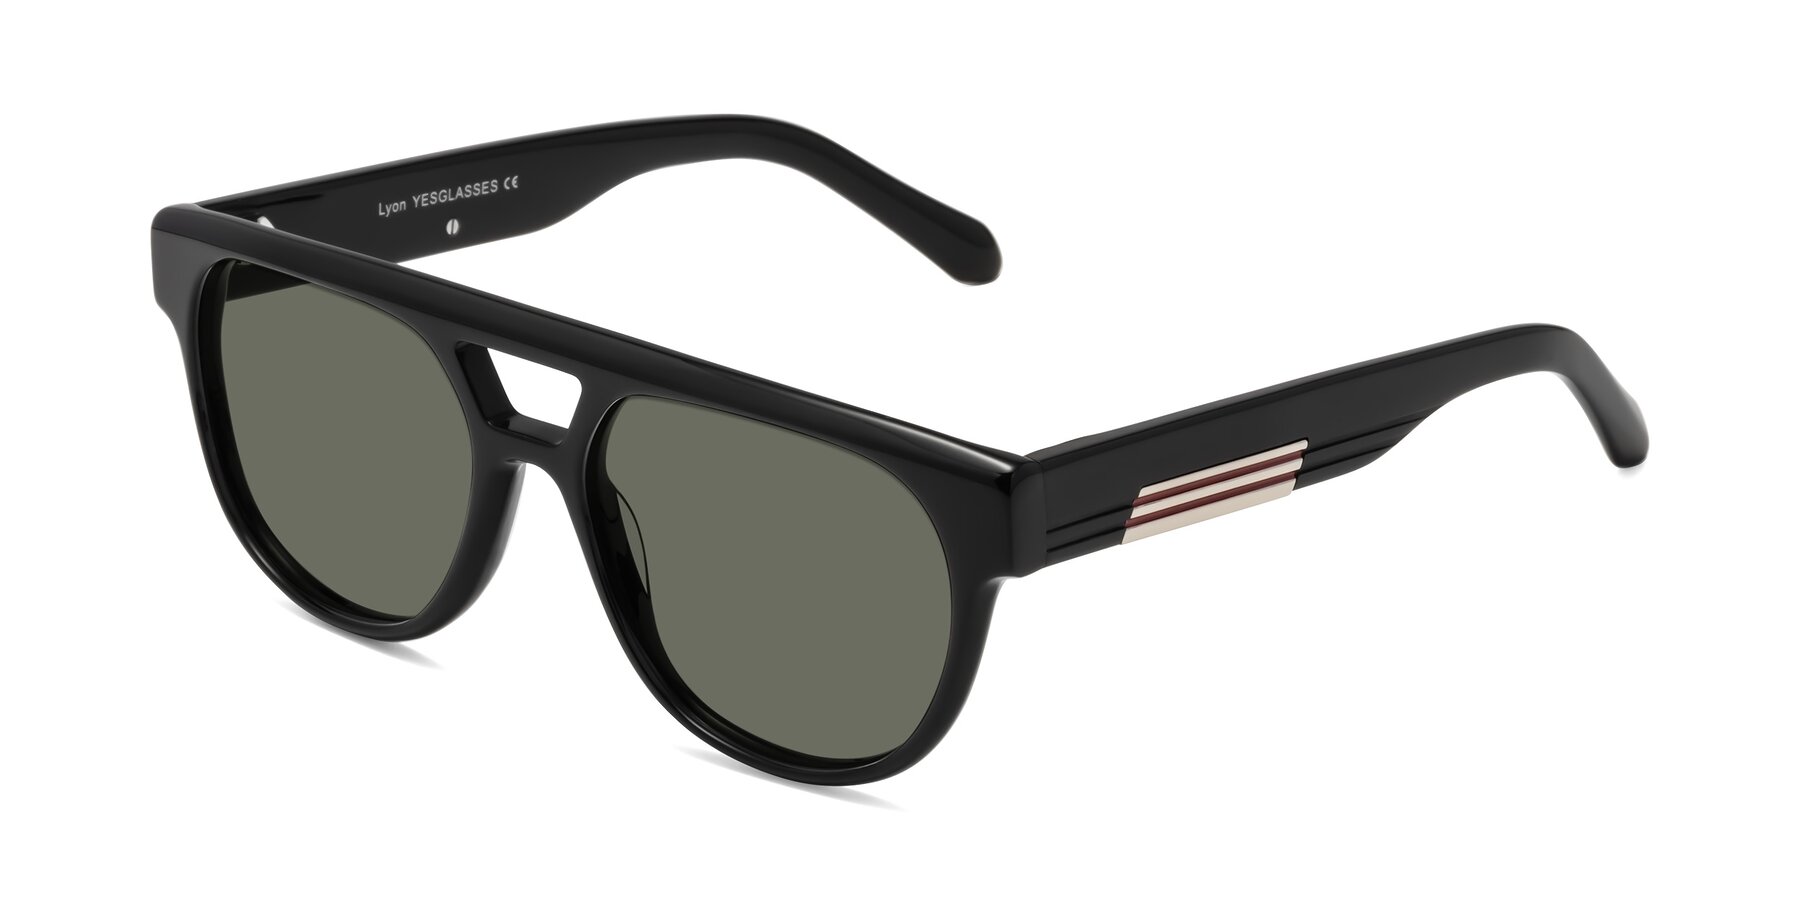 Angle of Lyon in Black with Gray Polarized Lenses